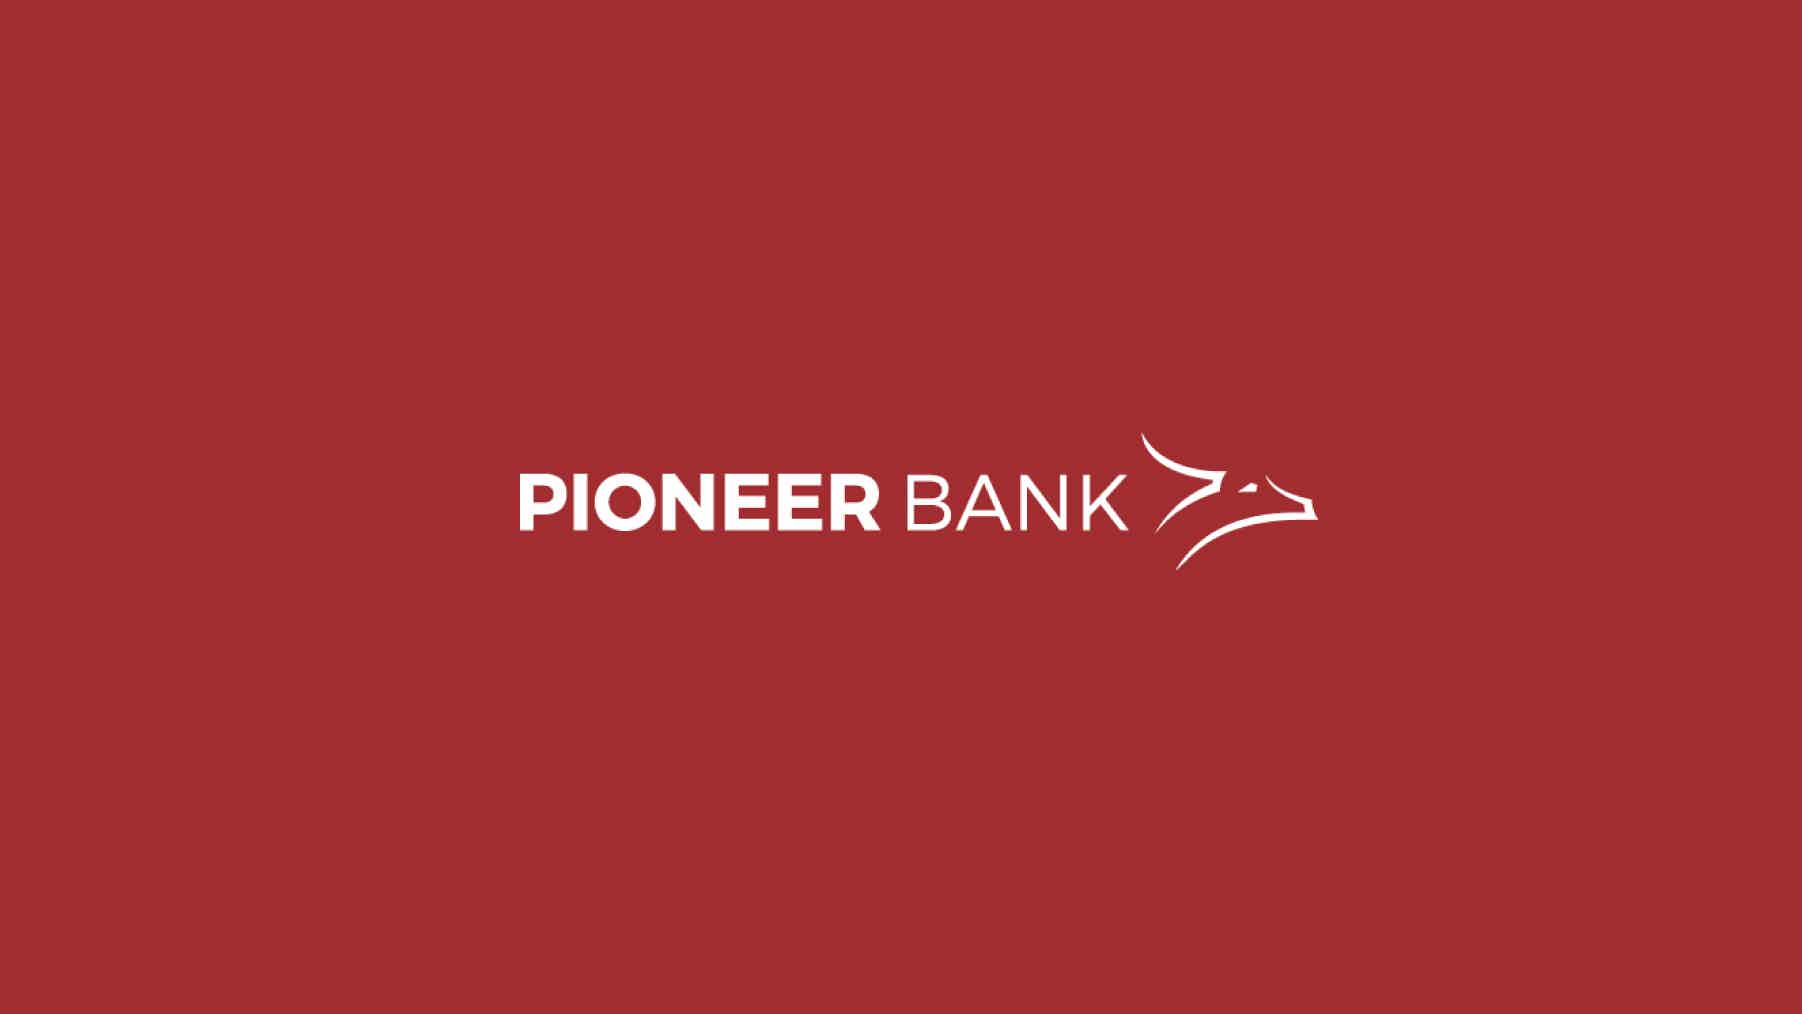 See what the benefits of the Pioneer Bank Loans! Source: Facebook Pioneer Bank.